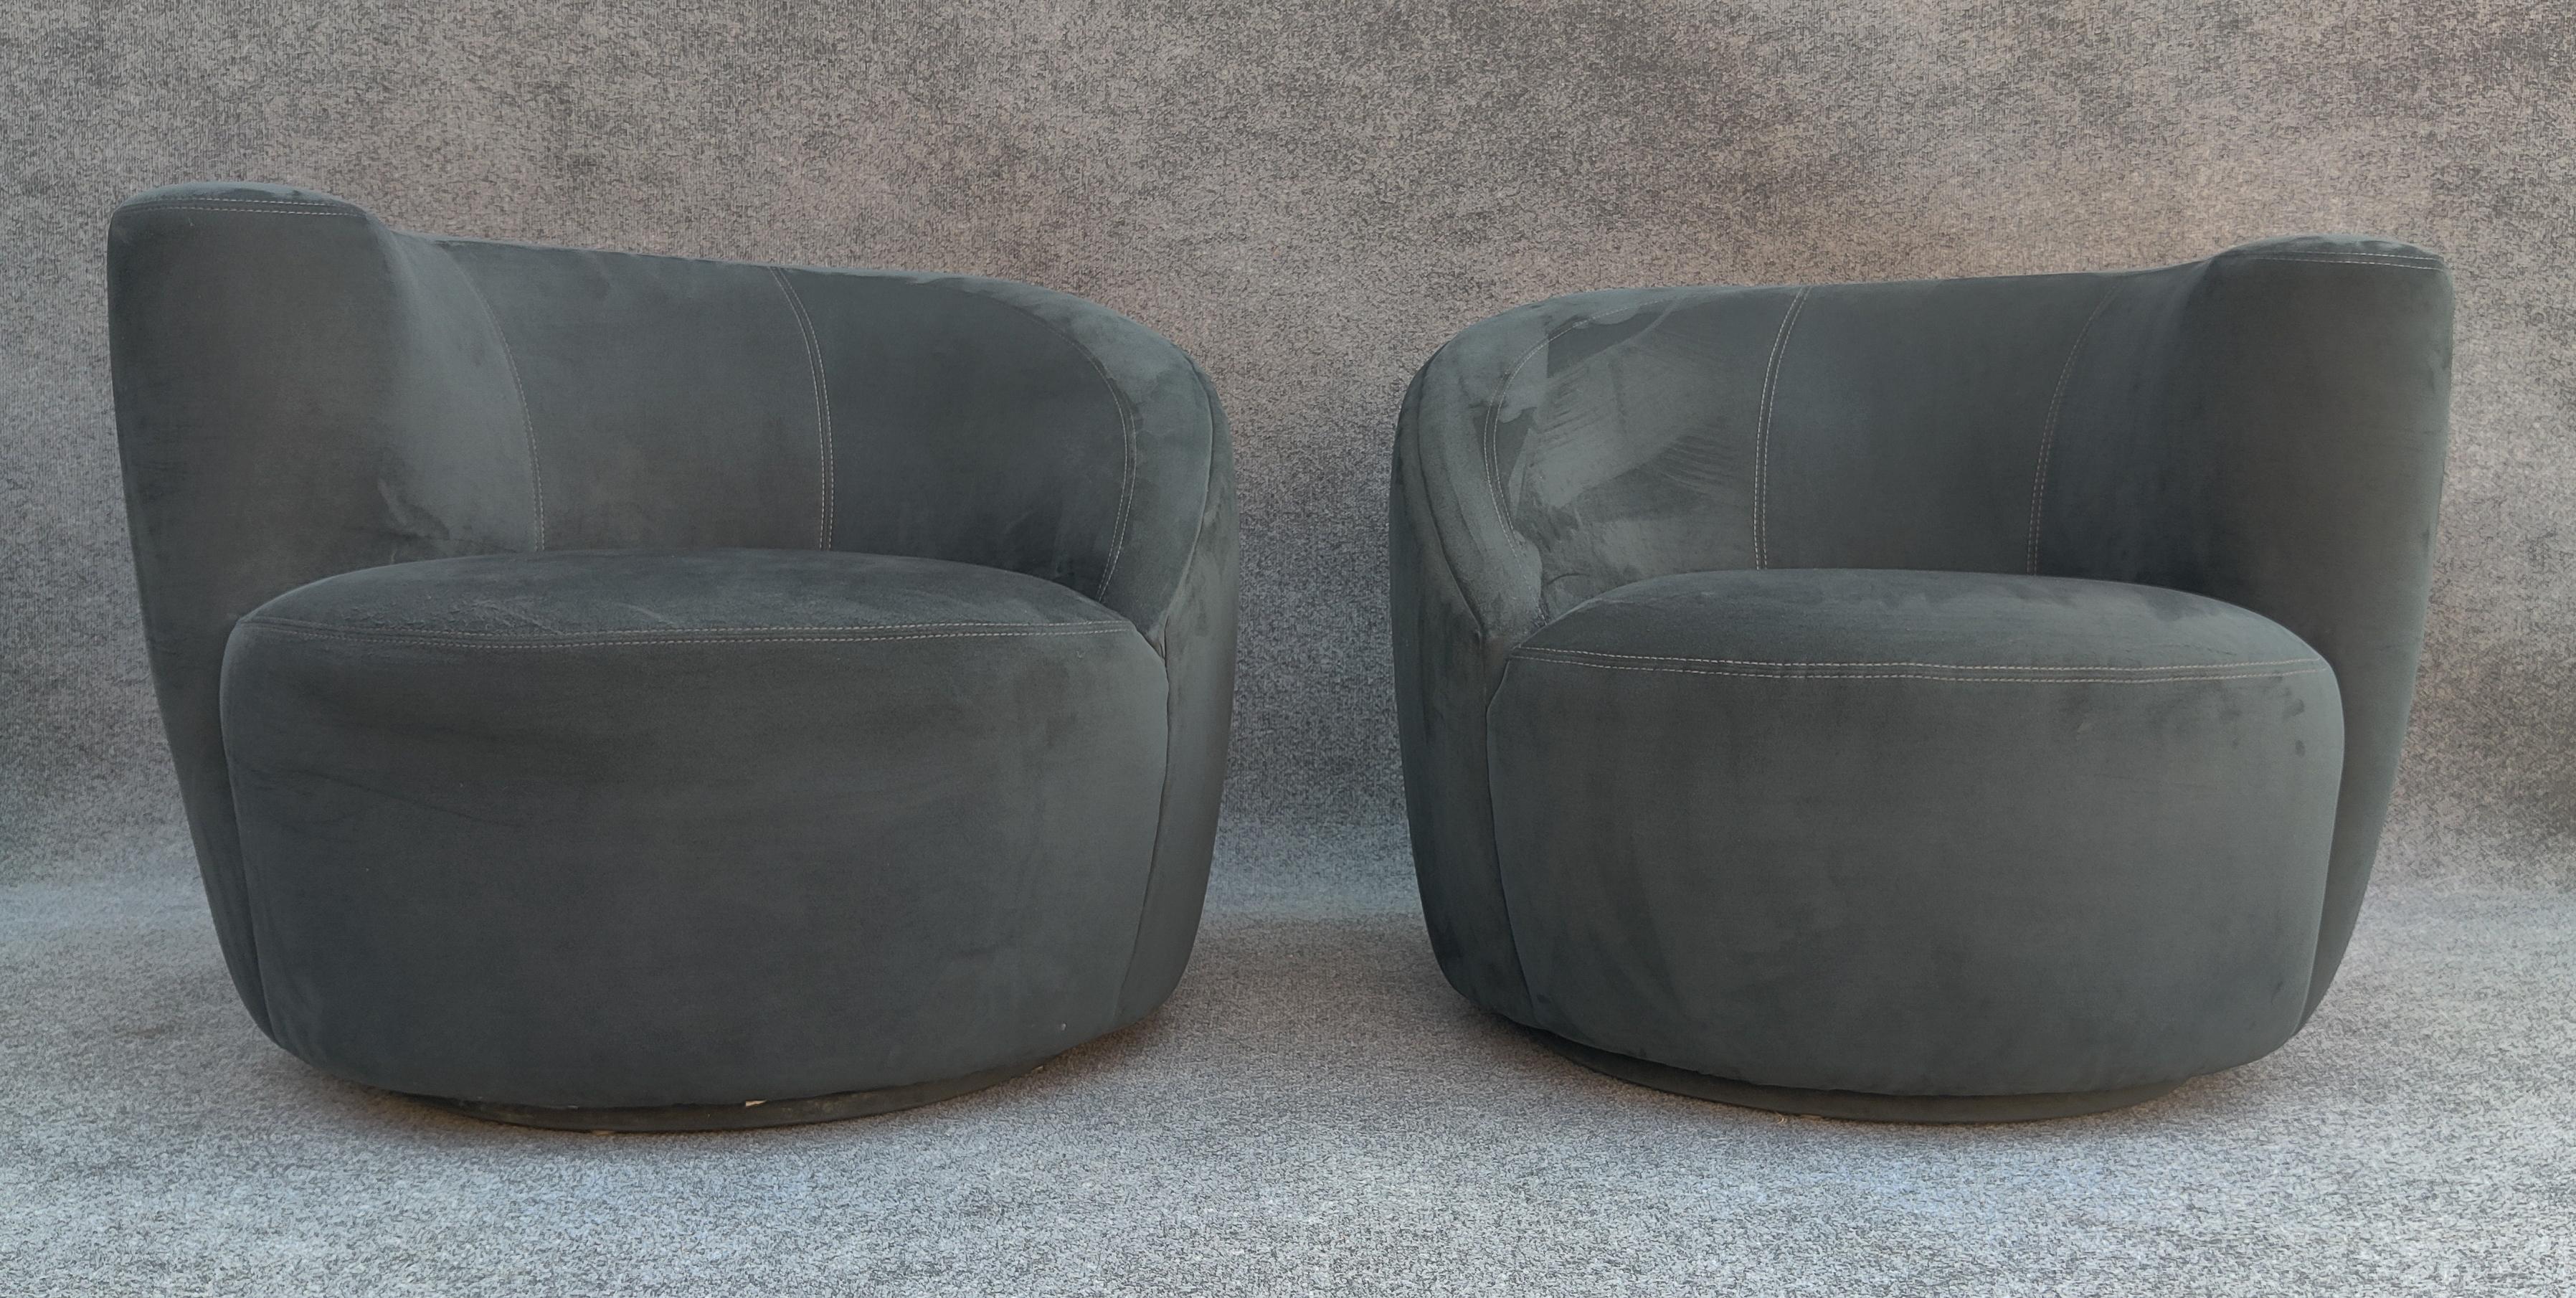 Reminiscent of the Nautilus chair, designed by Vladimir Kagan in 1950, here is a sculptural pair (left and right) of iconic mid-century modern swivel lounge chairs. Its distinct and organic design features a curved, shell-like shape made of suede or